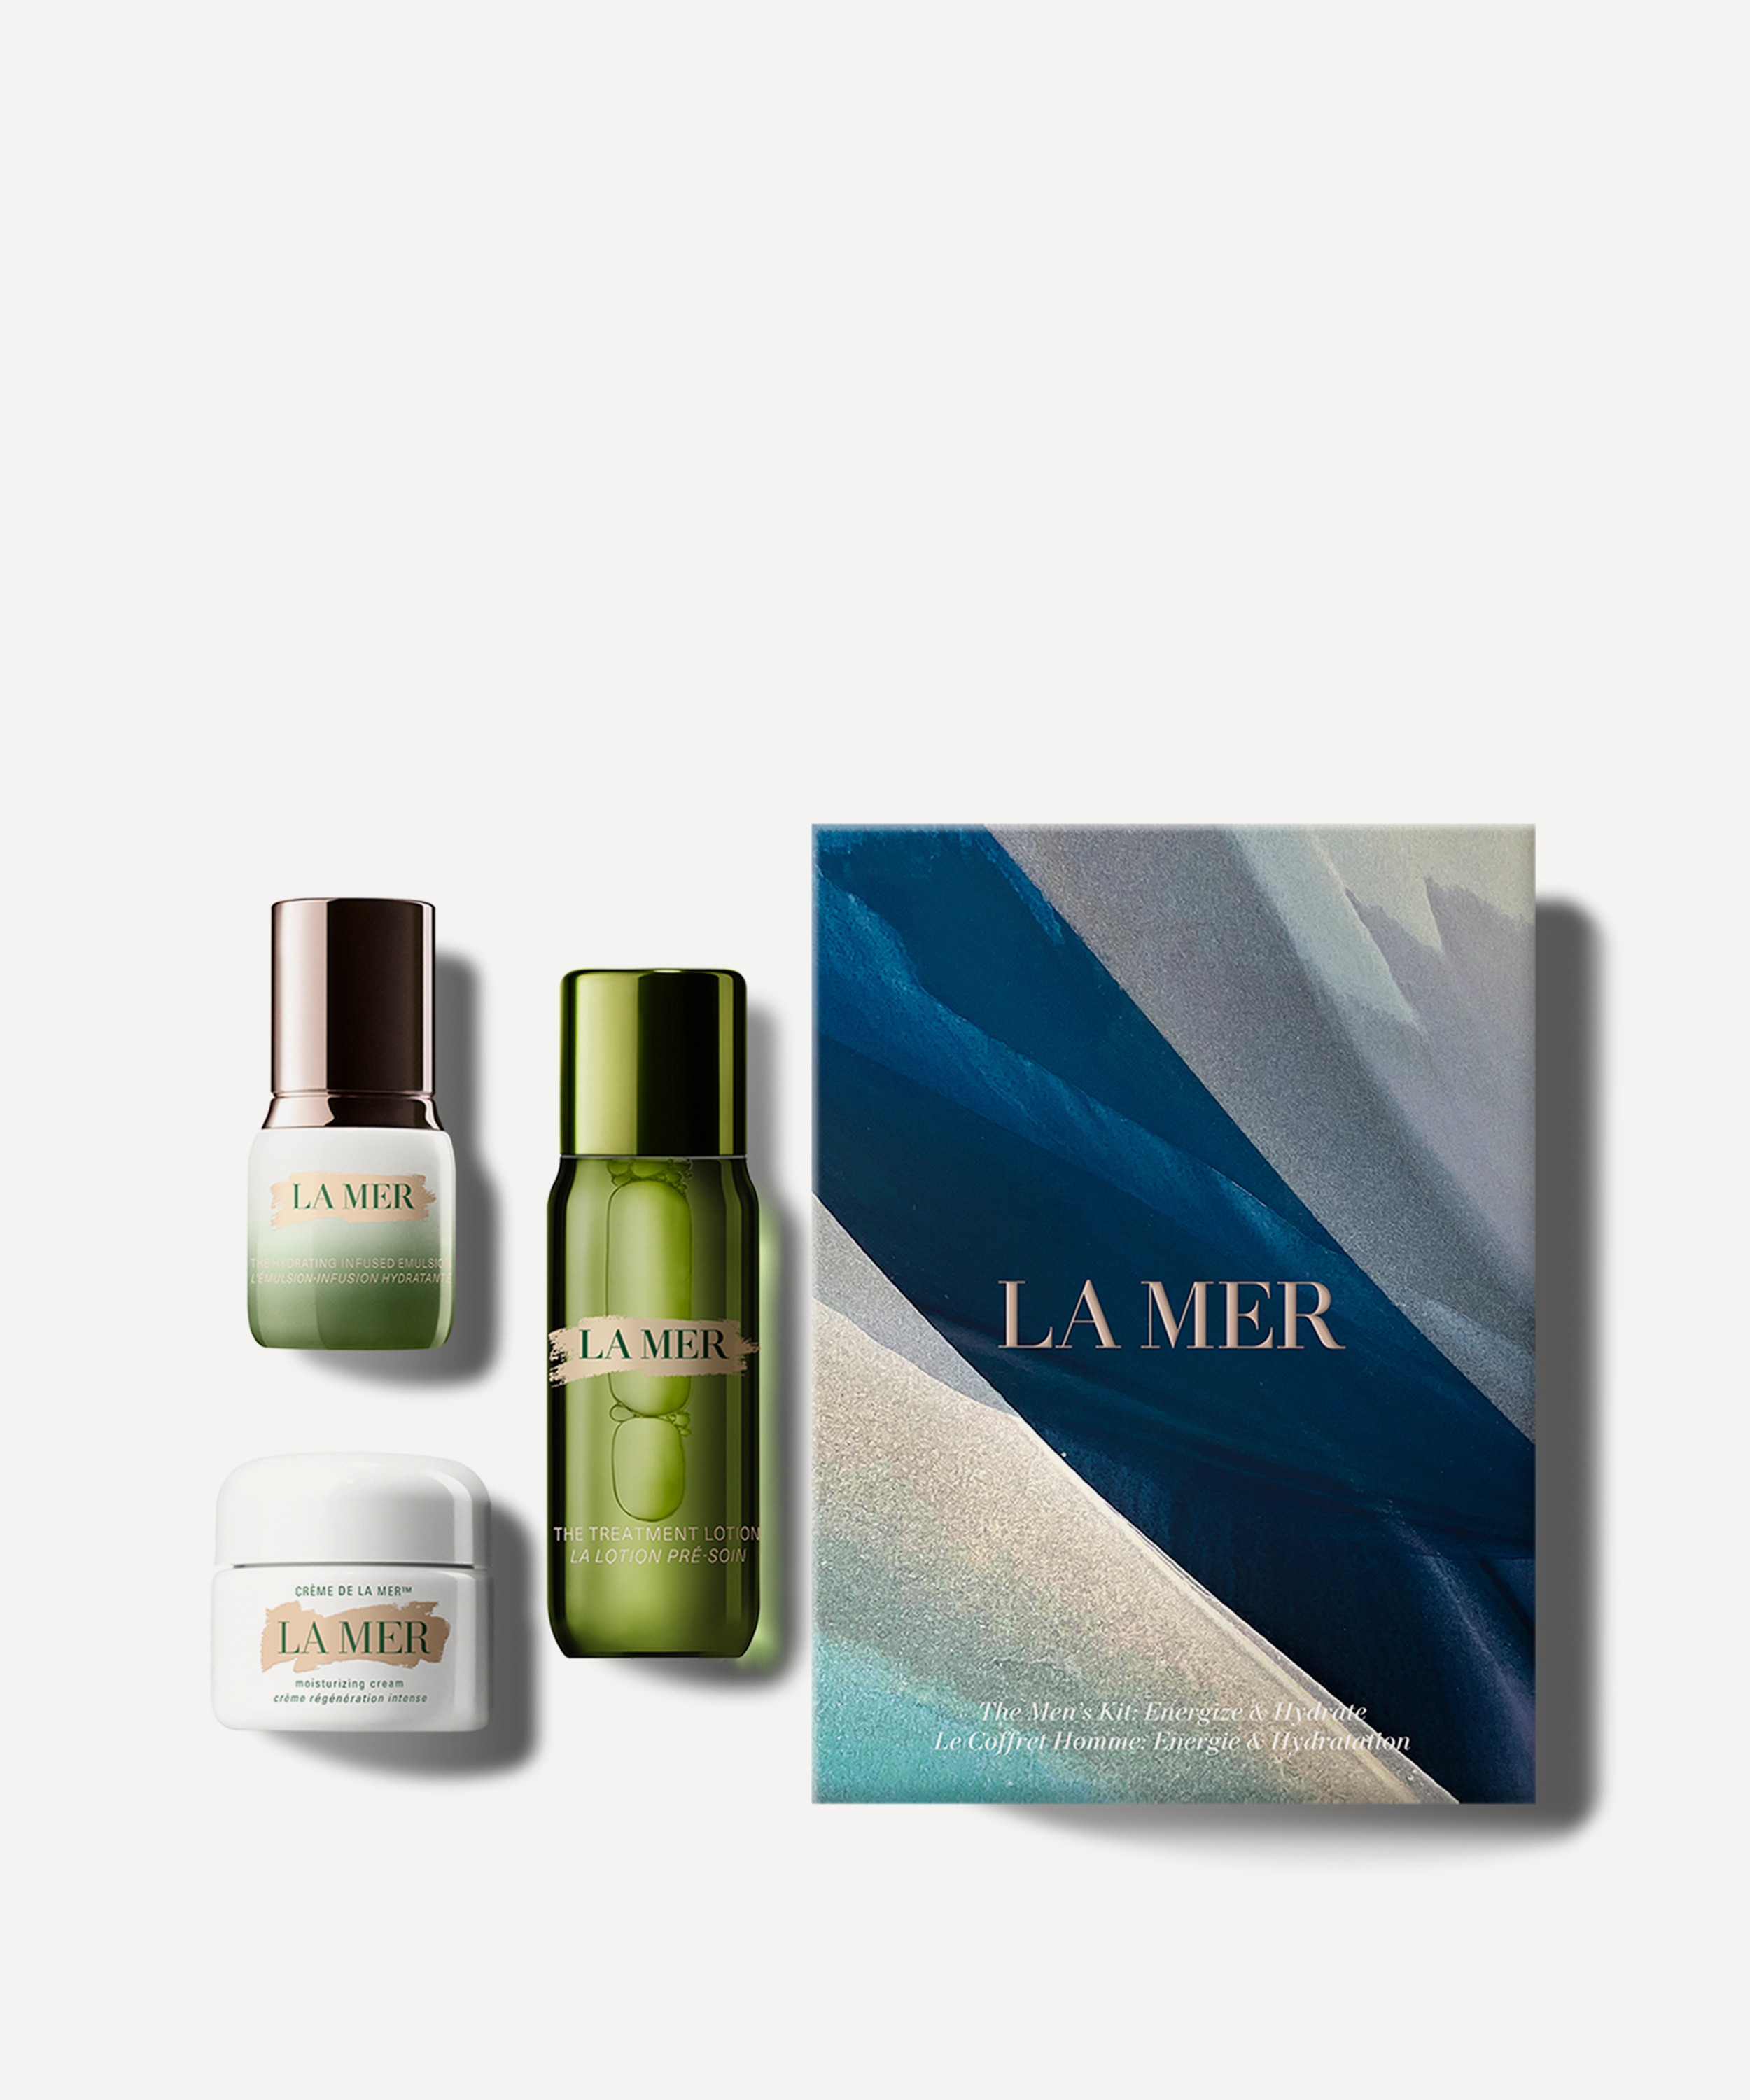 La Mer - The Men's Skincare Kit to Energise and Hydrate